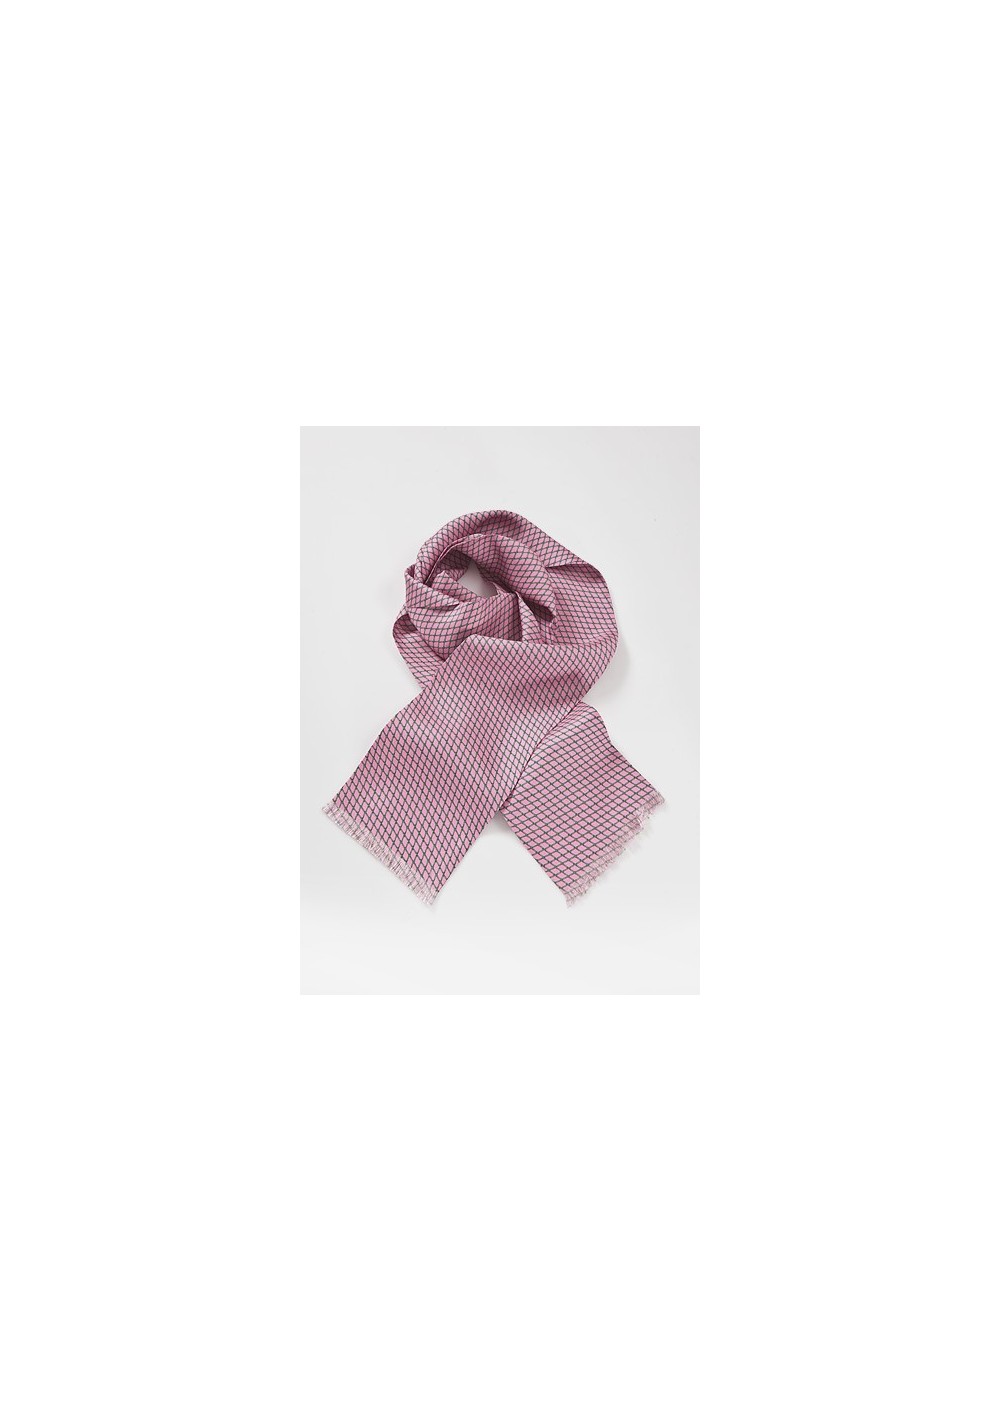 Vibrant Pink Man's Scarf with Net Pattern